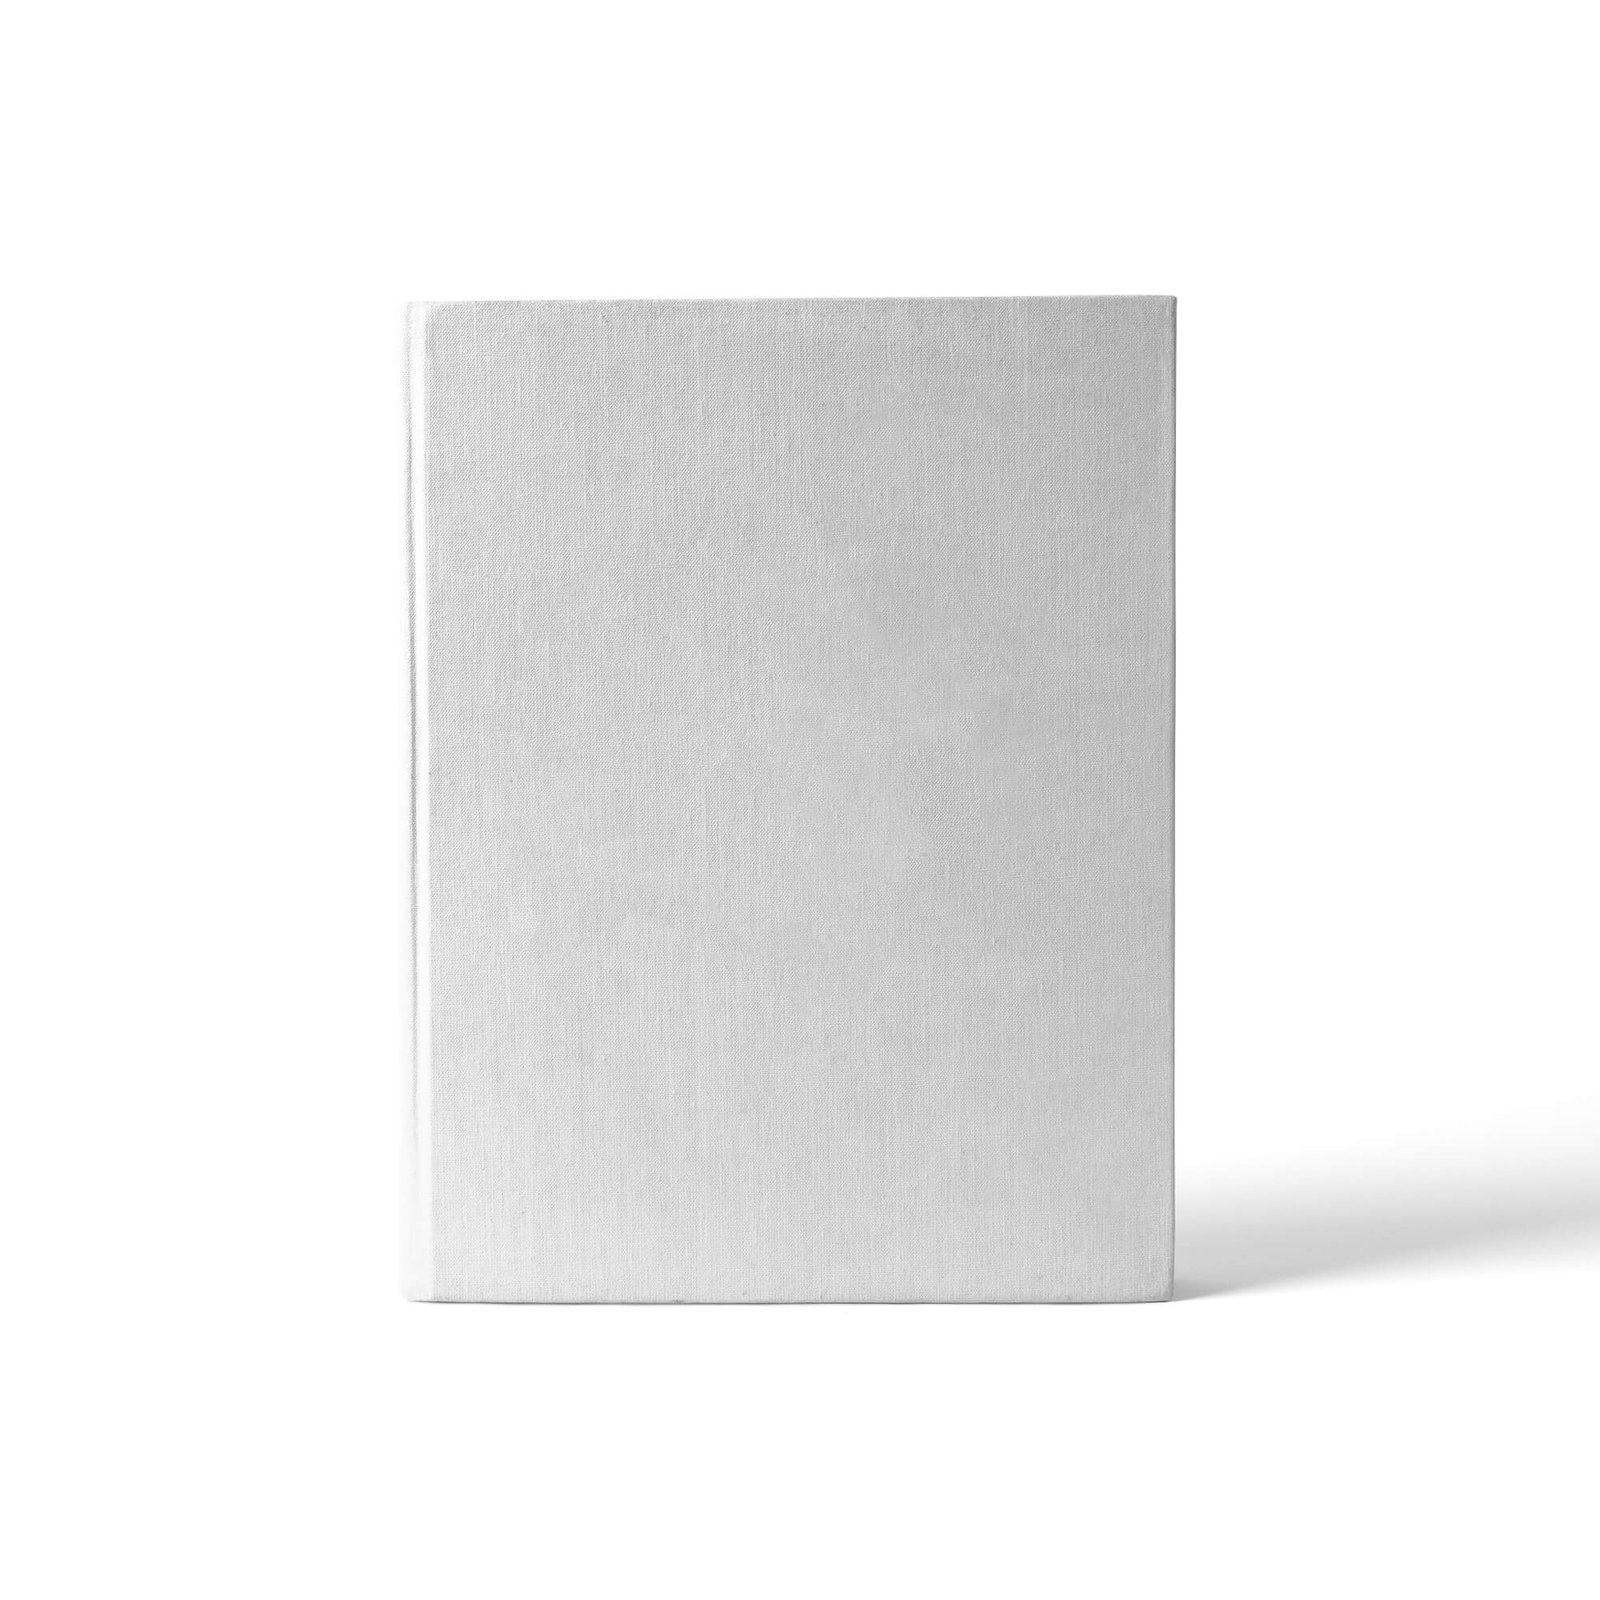 Blank Free Book Cover PSD Mockup Template